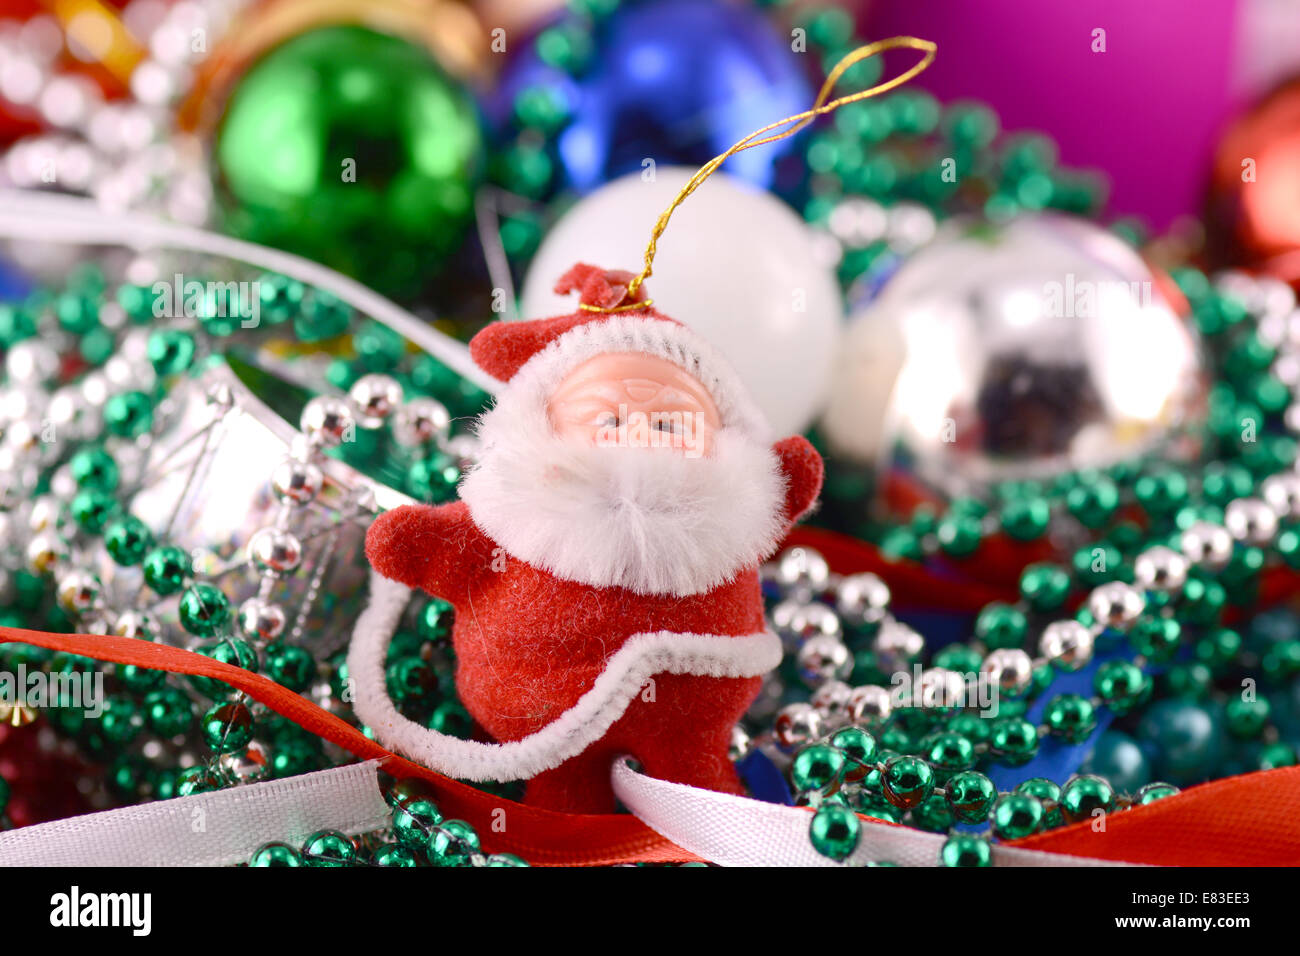 Santa Claus with Christmas toys, new year decoration Stock Photo